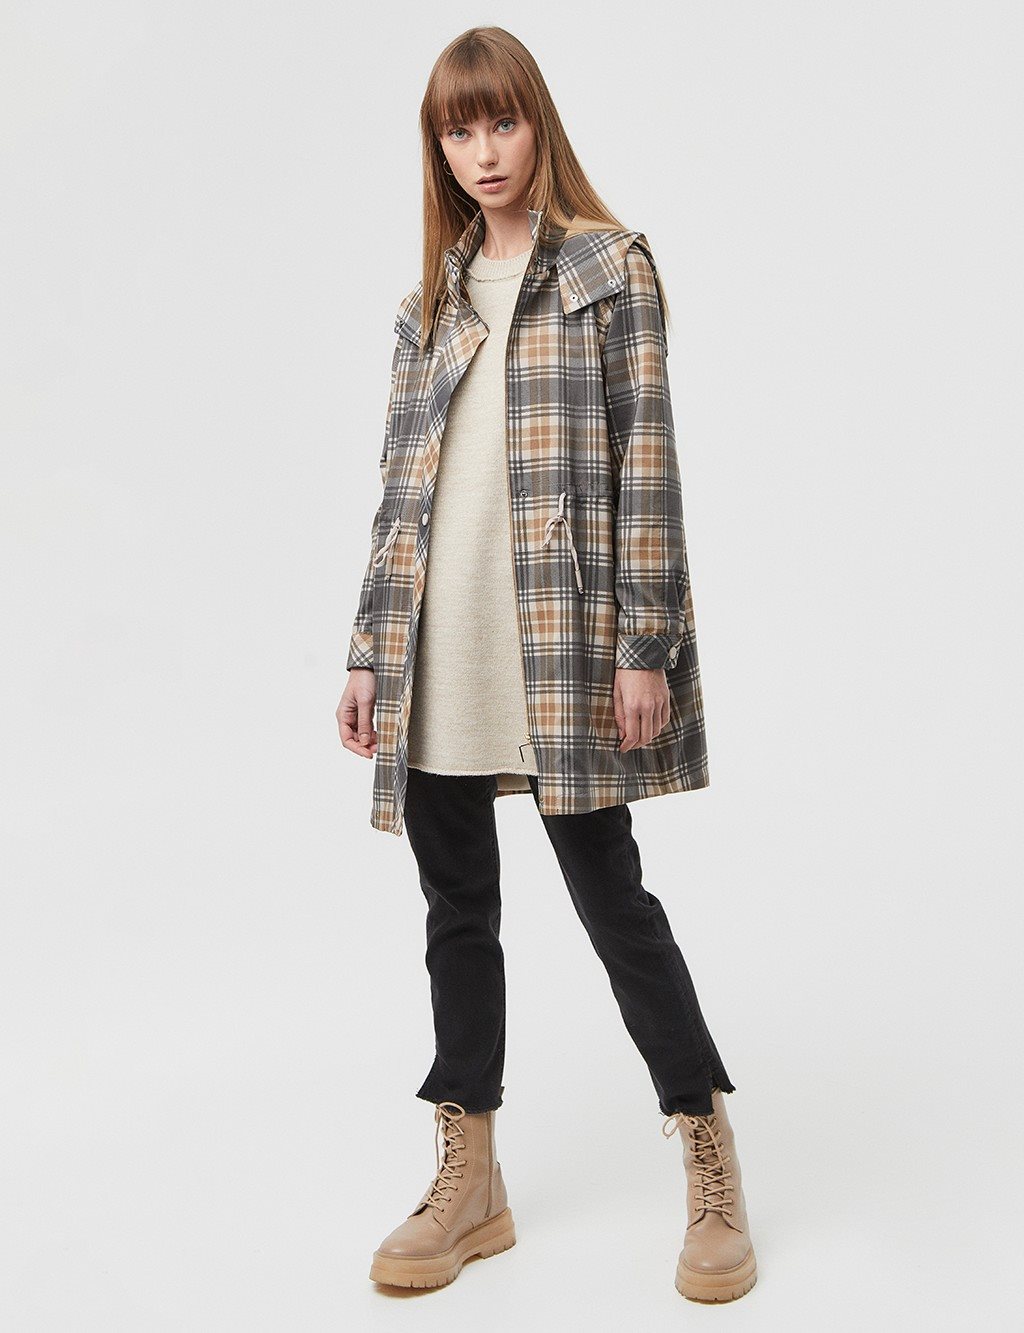 Checked Patterned Hooded Trench Coat / Cap Stone